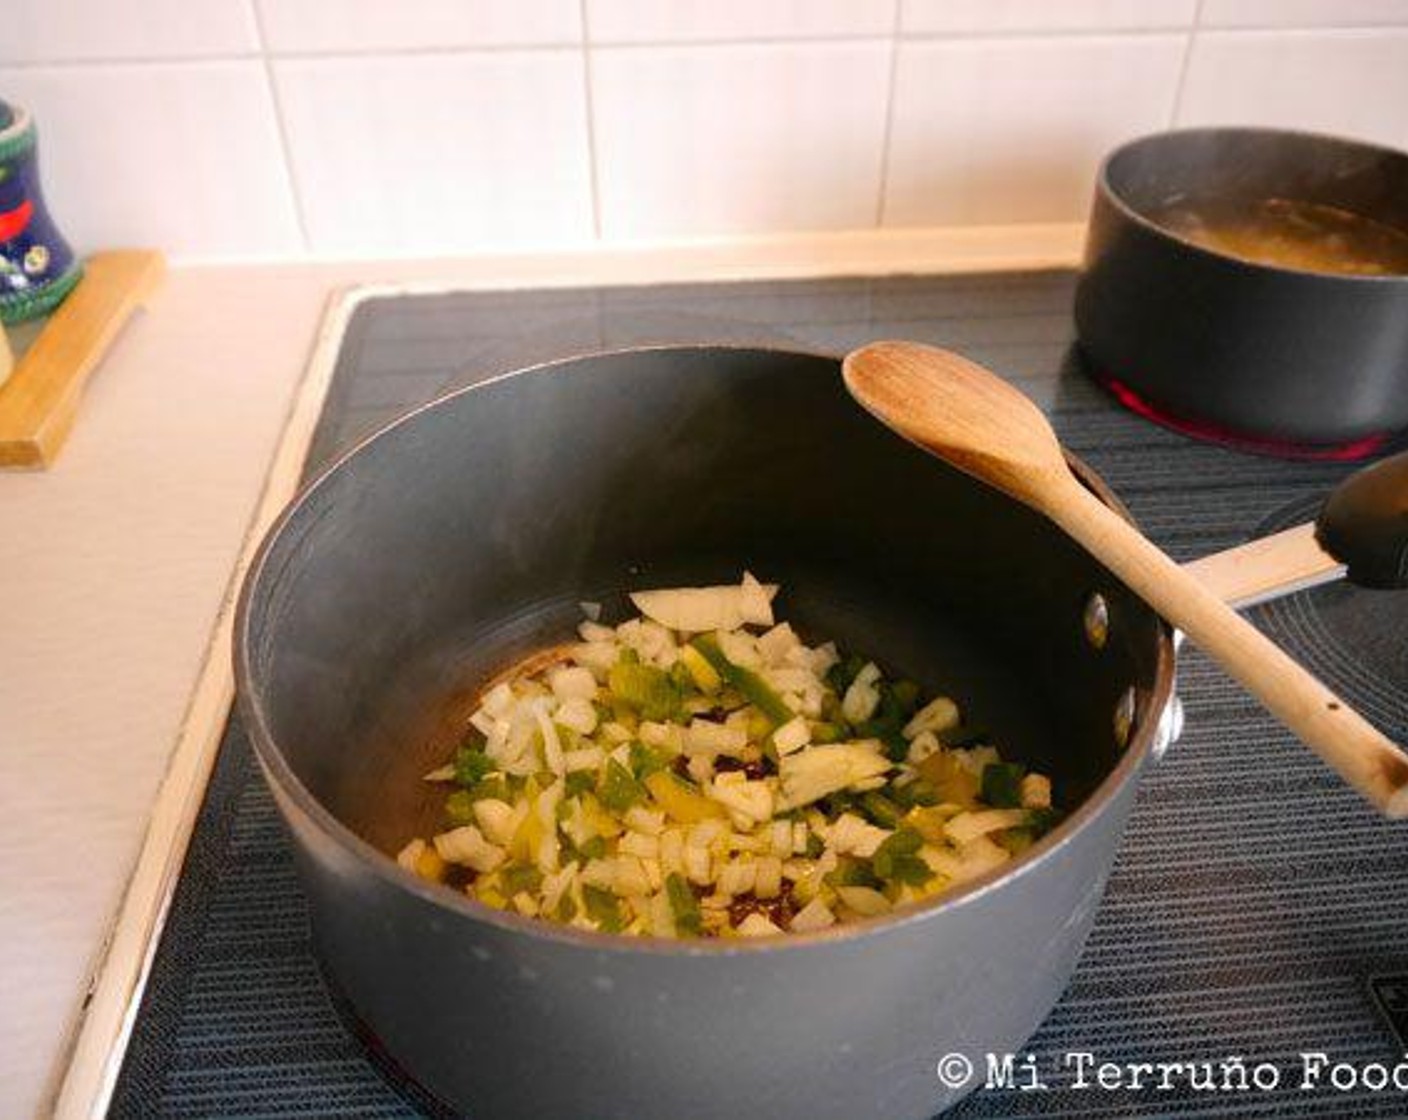 step 5 In a warm pan, add the Extra-Virgin Olive Oil (3 Tbsp), Salt (to taste), onion, Garlic (3 cloves), and green bell pepper and leave to cook for approximately 5 minutes until soft.